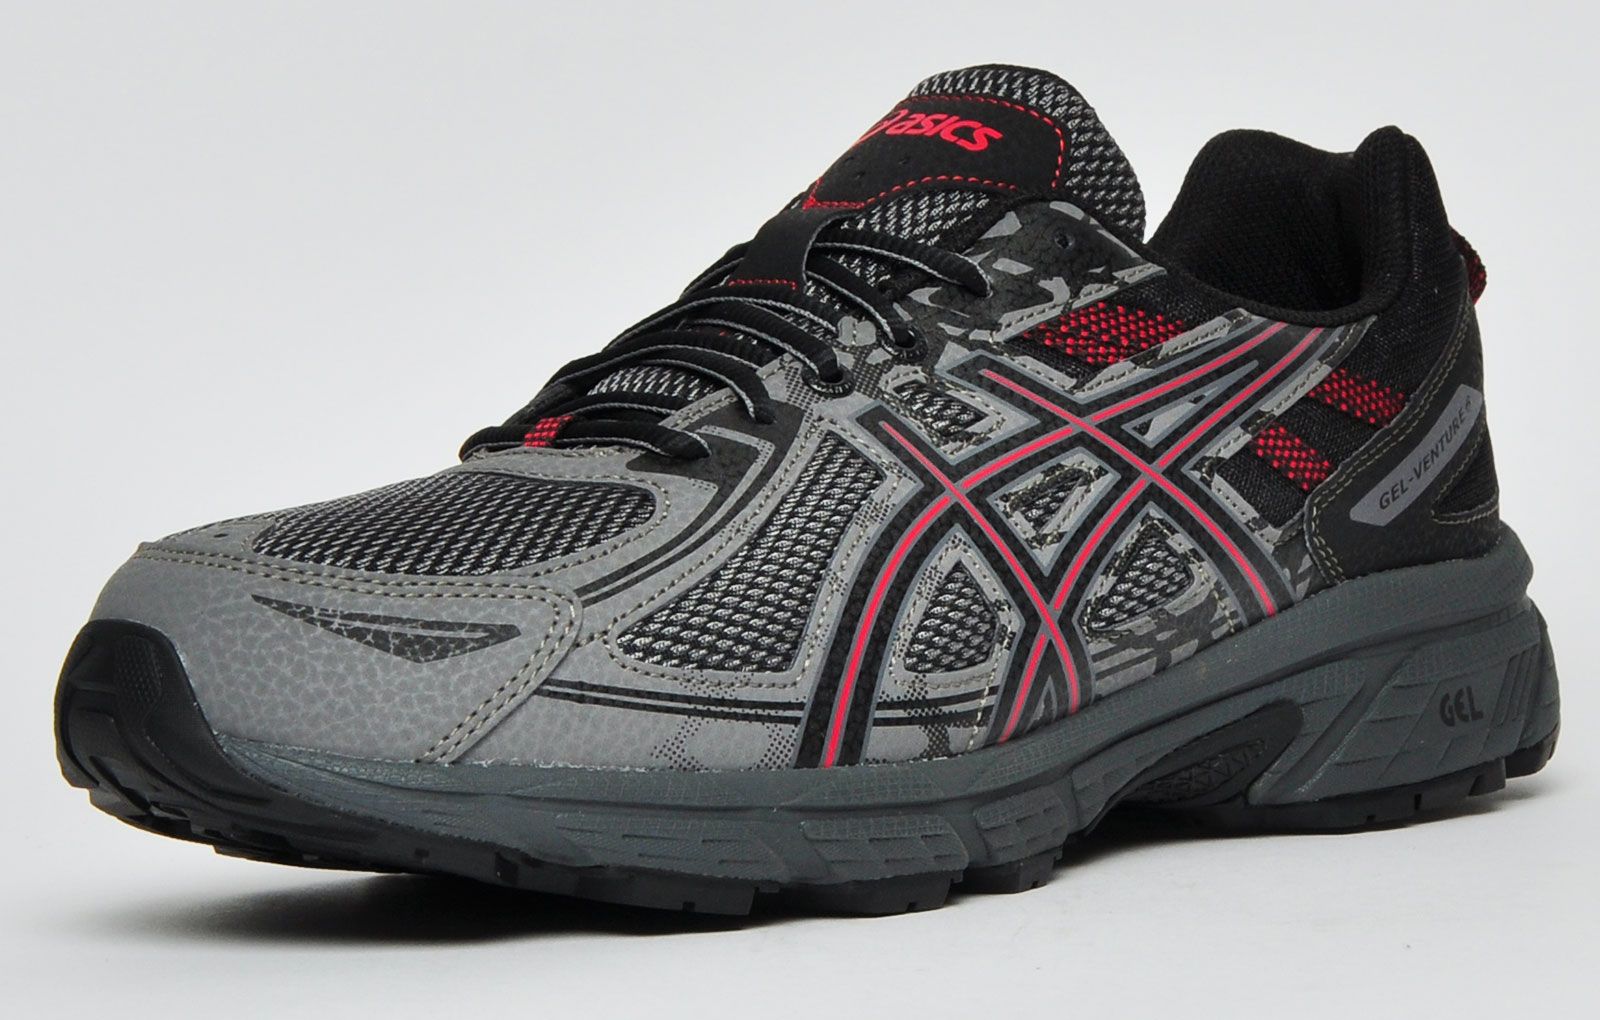 <p>These Asics Gel Venture 6 men’s all-terrain trail running shoes will provide excellent support and traction no matter what comes your way. Featuring a practical lugged outsole that offers grip on uphill and downhill conditions. Whether you’re a beginner or professional, these all terrain running shoes are perfect for you! Engineered from a fusion of textile mesh and synthetic materials, these Asics Gel Venture 6 men’s all-terrain running shoes feature a practical lightweight design with maximum performance capabilities, the Asics Venture 6 is a must have on and off road shoe that will deliver on every front.</p> <p>- Textile mesh upper construction enhances ventilation </p> <p>- Supportive synthetic overlays deliver the perfect fit </p> <p>- Stitched Toe Bumper delivers extra protection against trail hazards</p> <p>- Removable Sockliner delivers super comfy wear</p> <p>- Reaarfoot Gel cushioning system delivers shock resistance</p> <p>- Trustic system reduces weight whilst upkeeping the support </p> <p>- Asics Branding throughout</p>